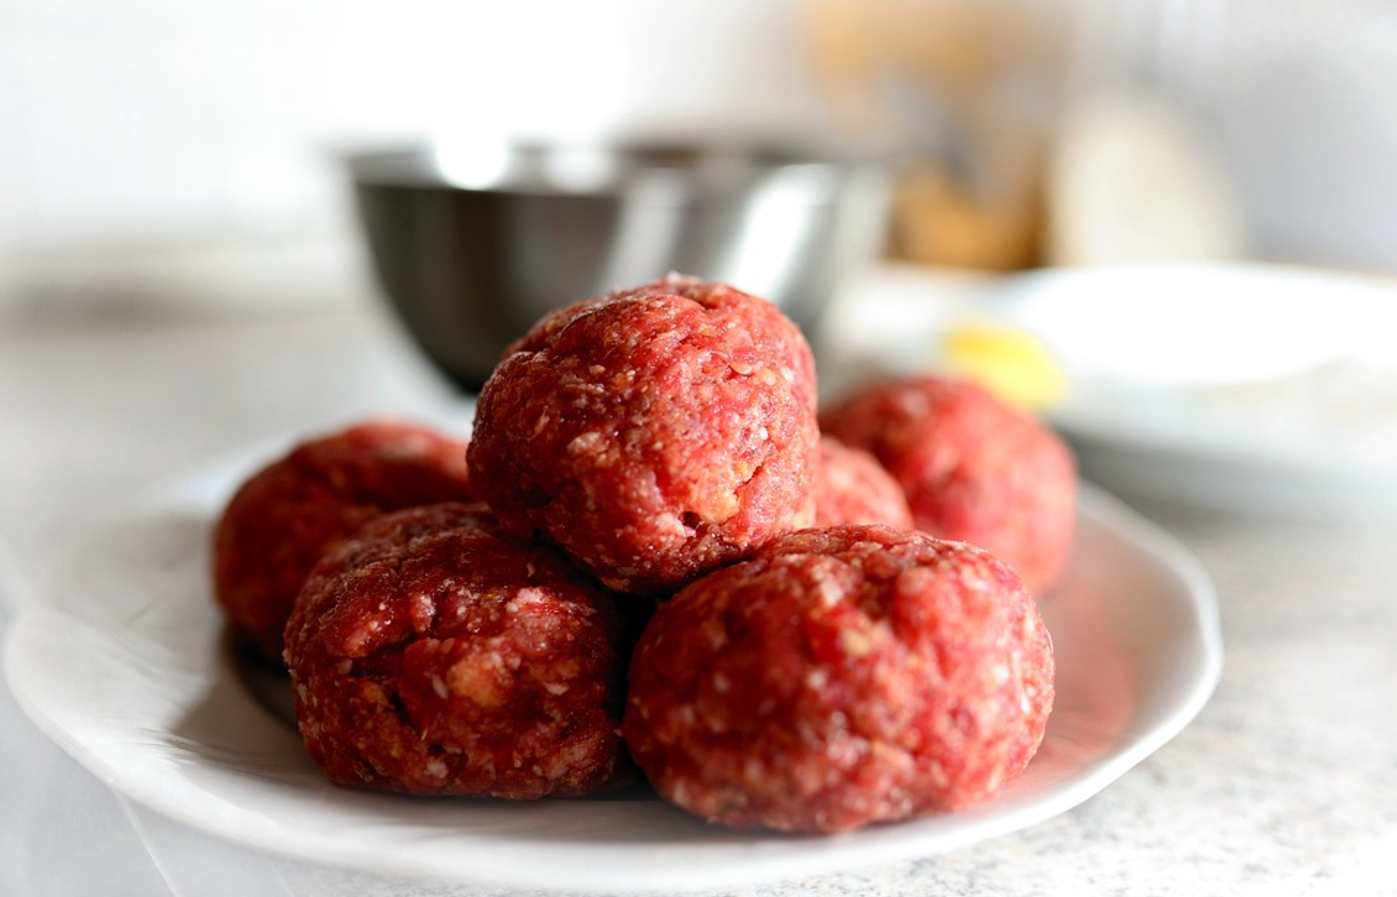 Meatballs for porridge, pasta or potatoes: a hearty lunch